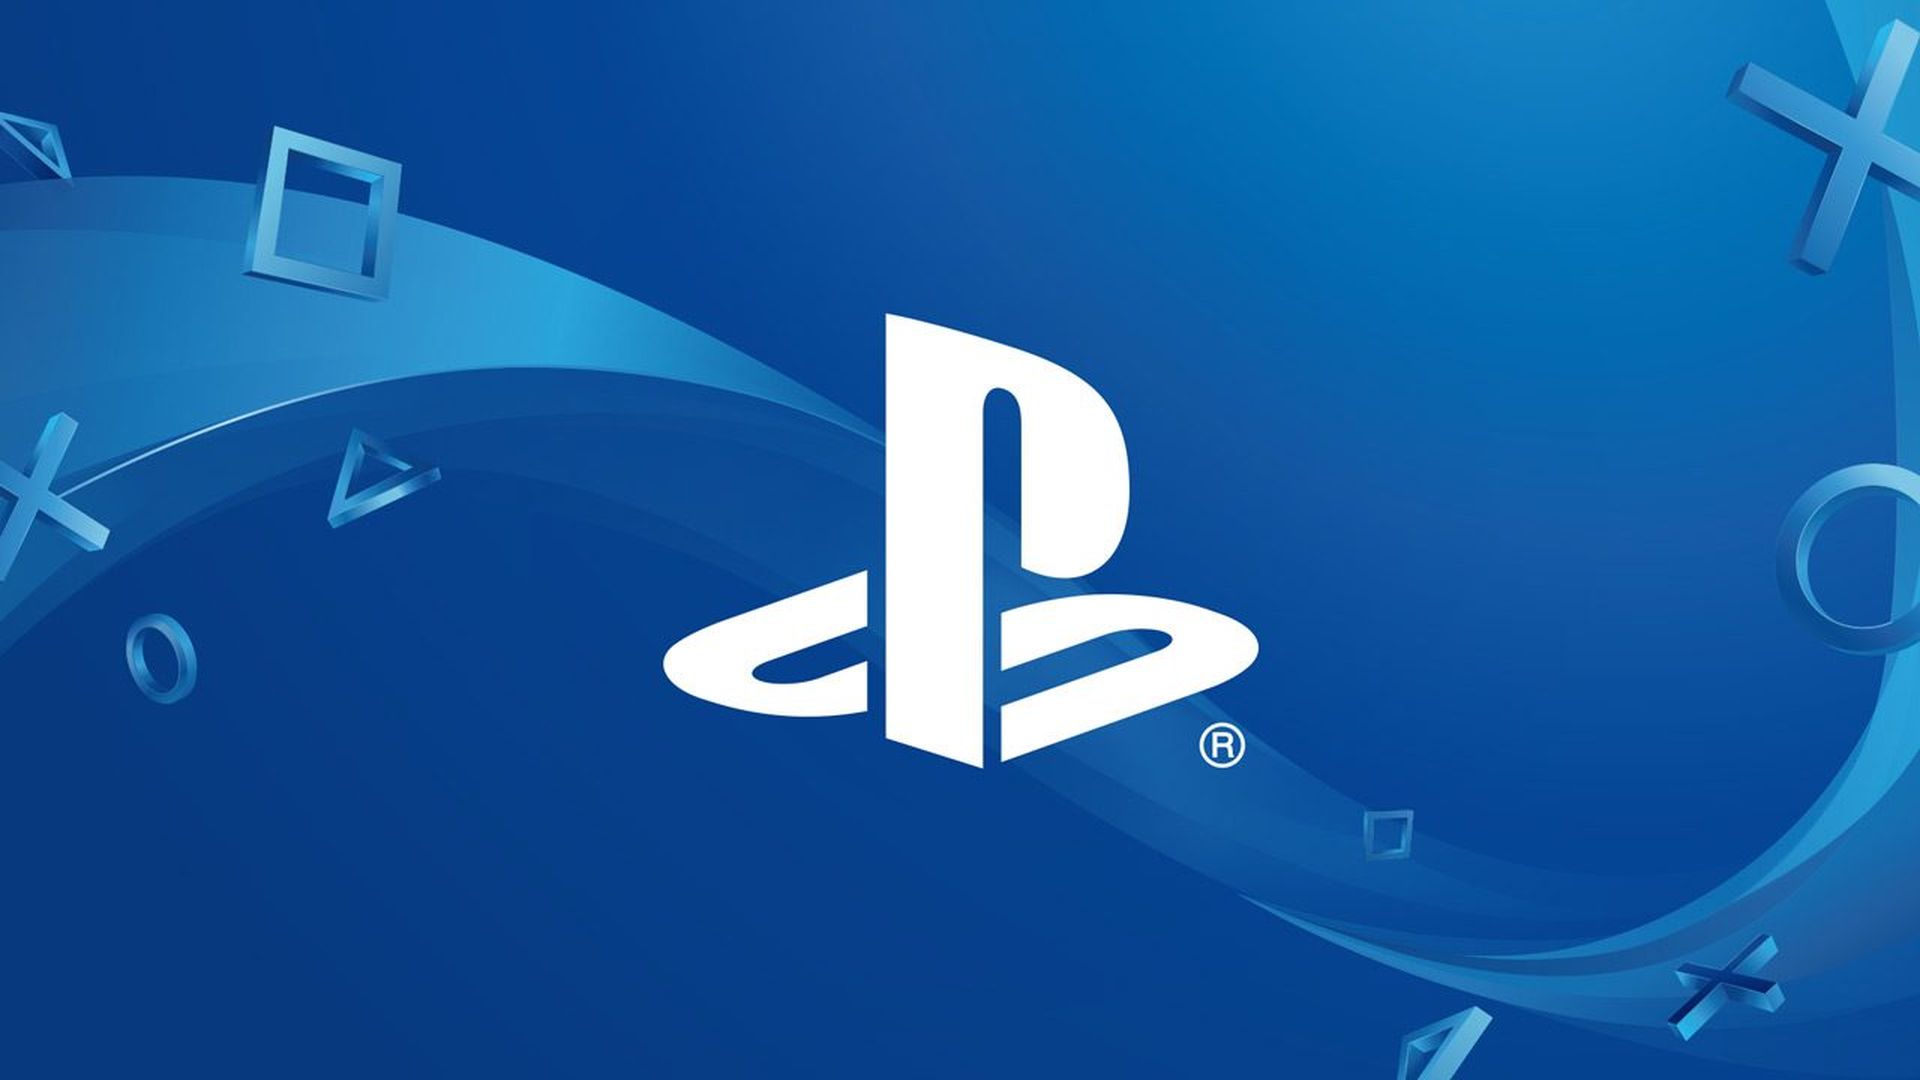 Sony's PlayStation logo against a blue background